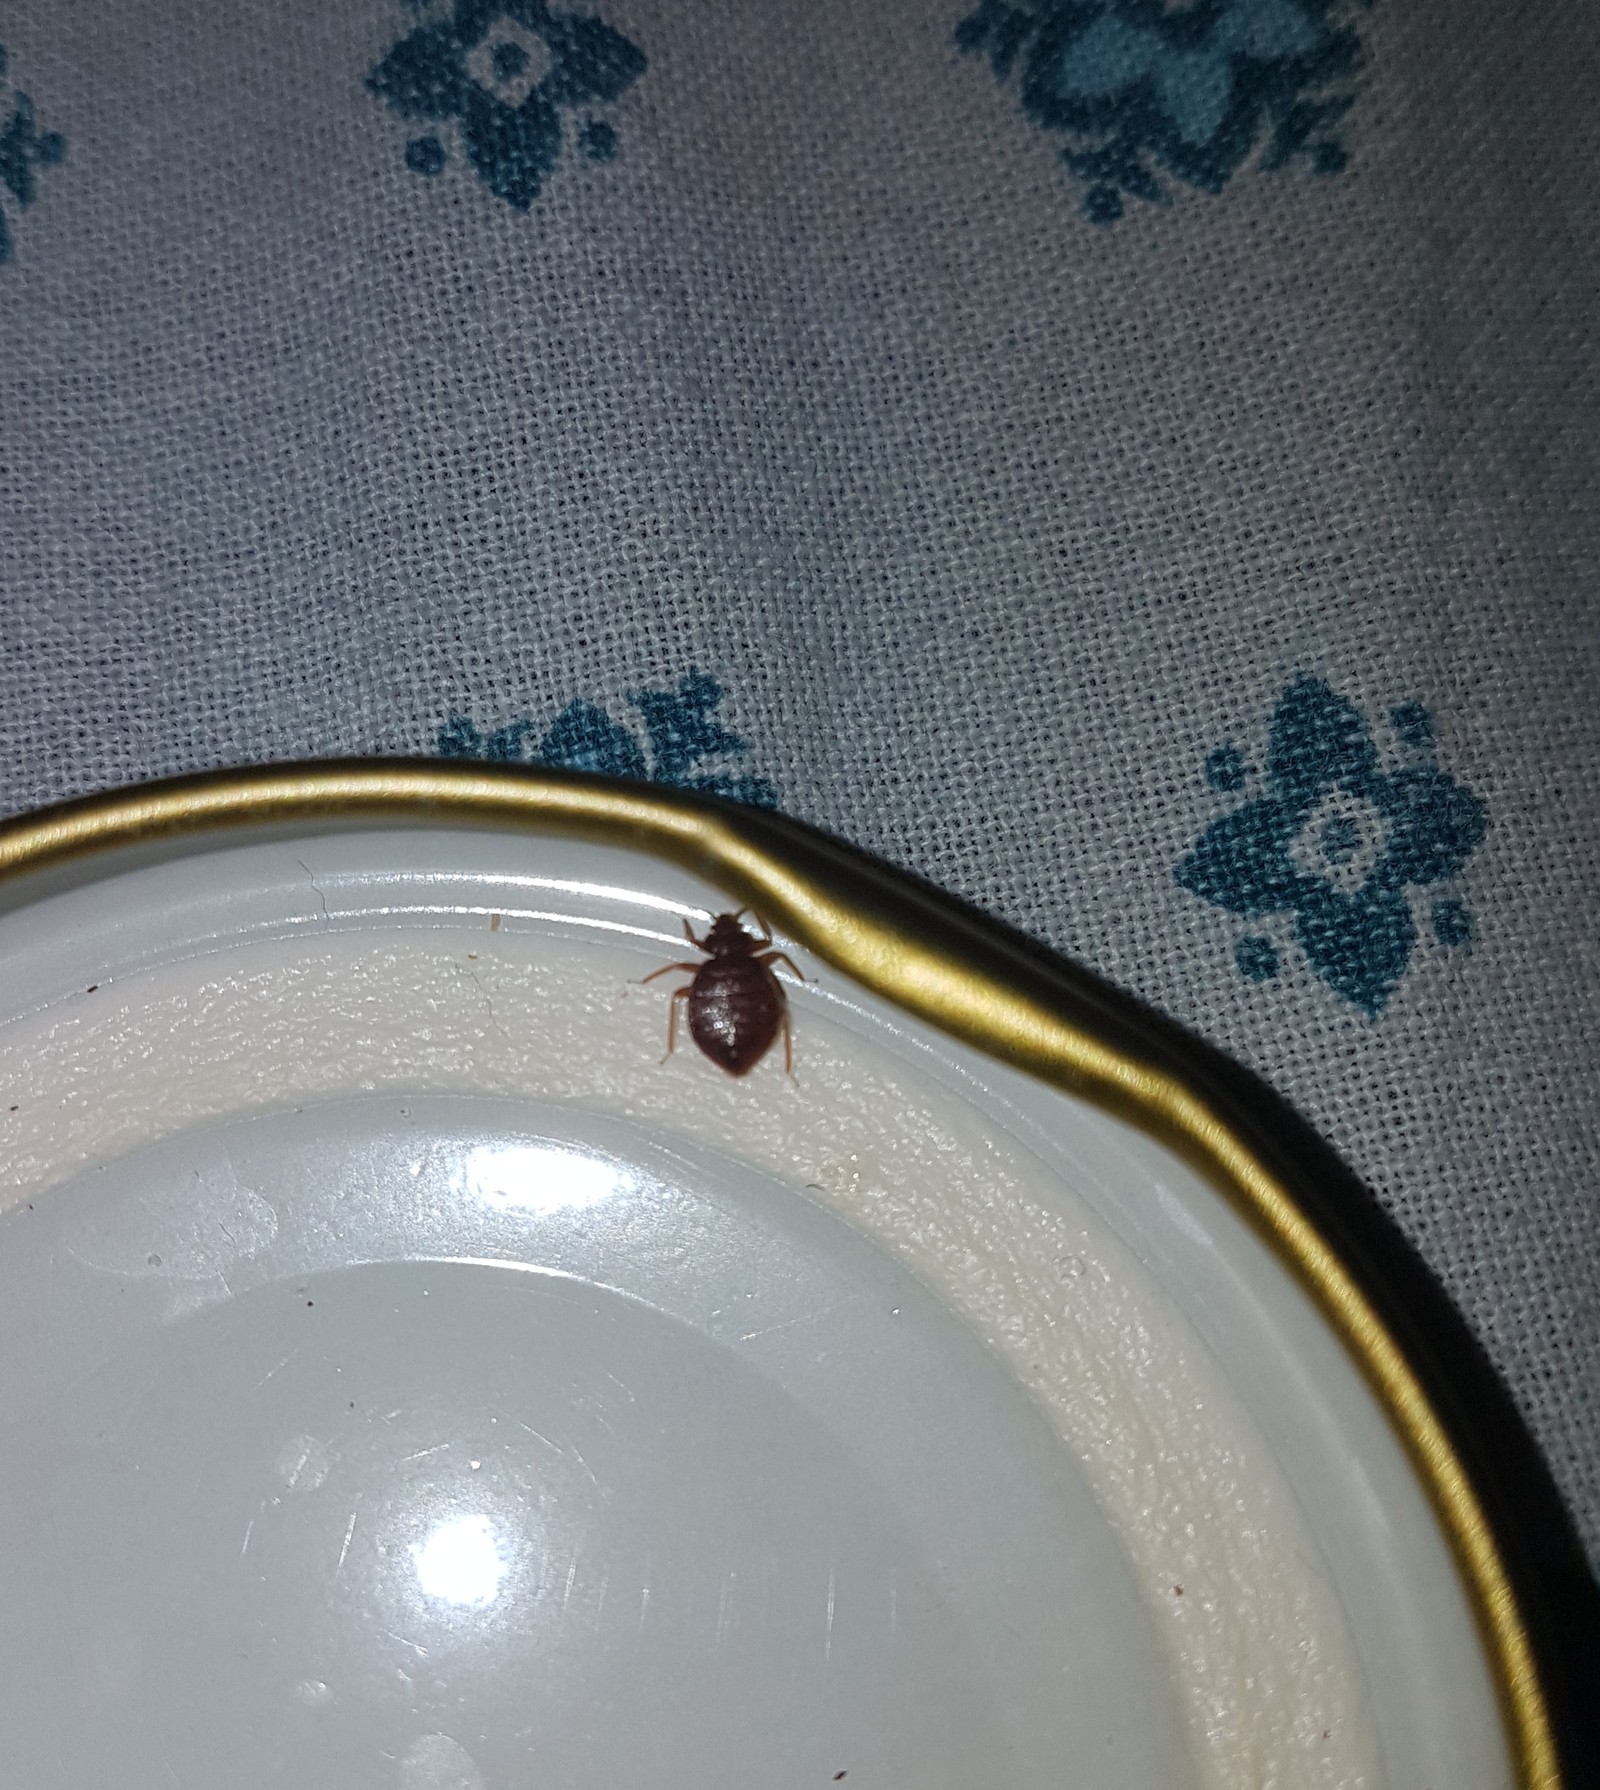 Tell me, is it a tick? - Insects, Bedbugs, Question